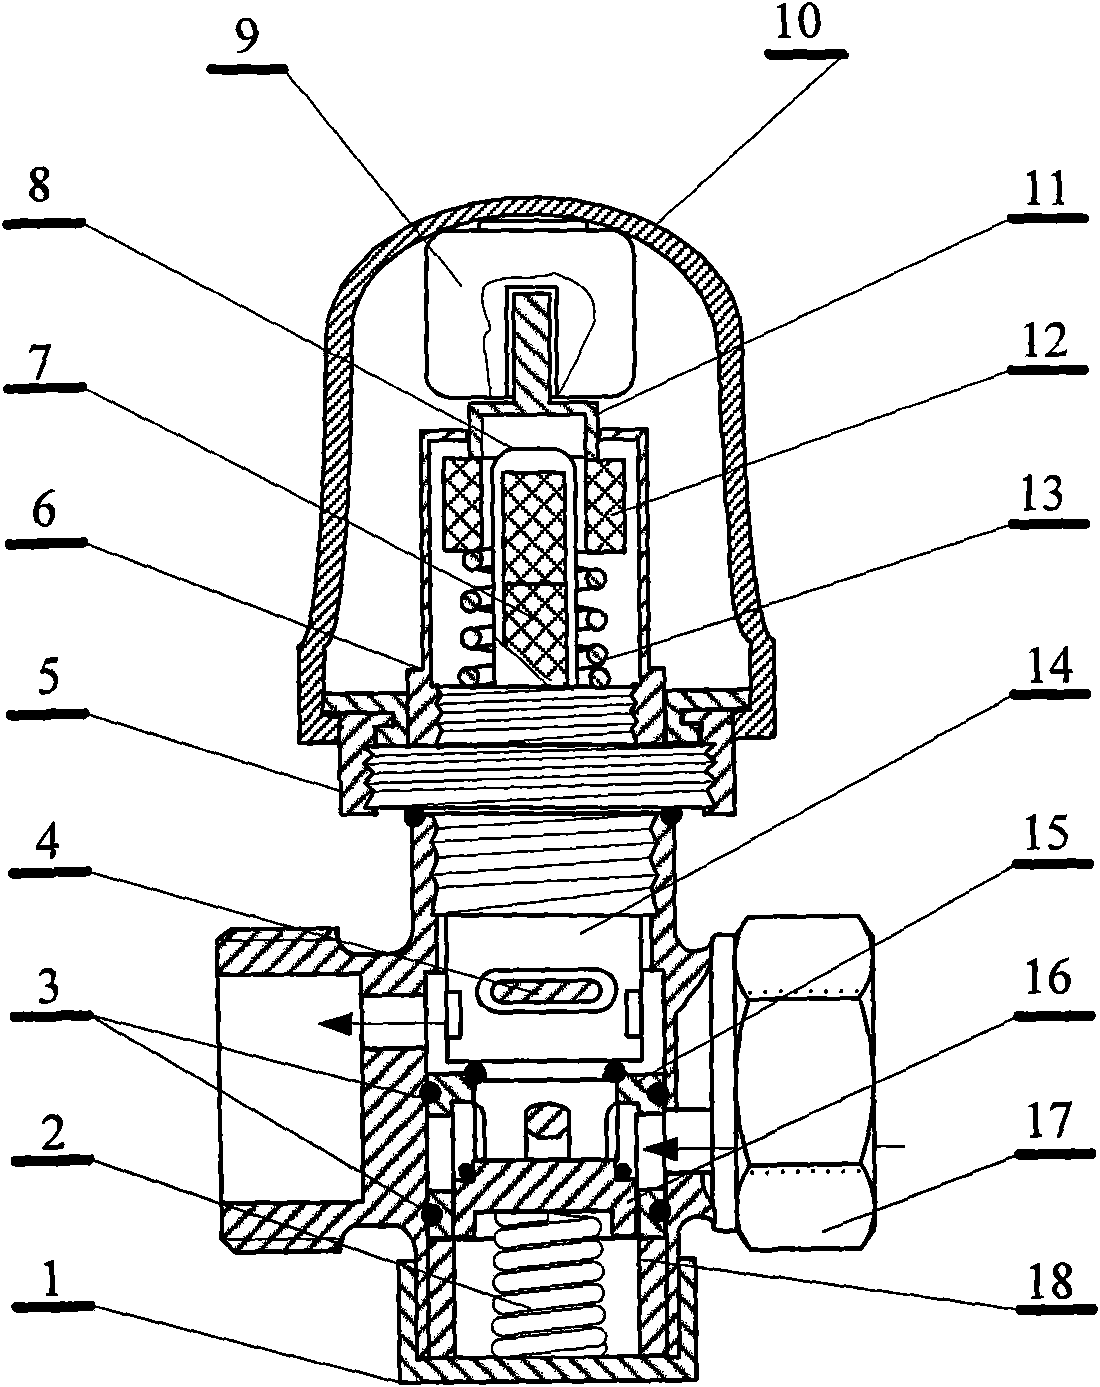 Temperature controlling valve with function of cleaning valve core